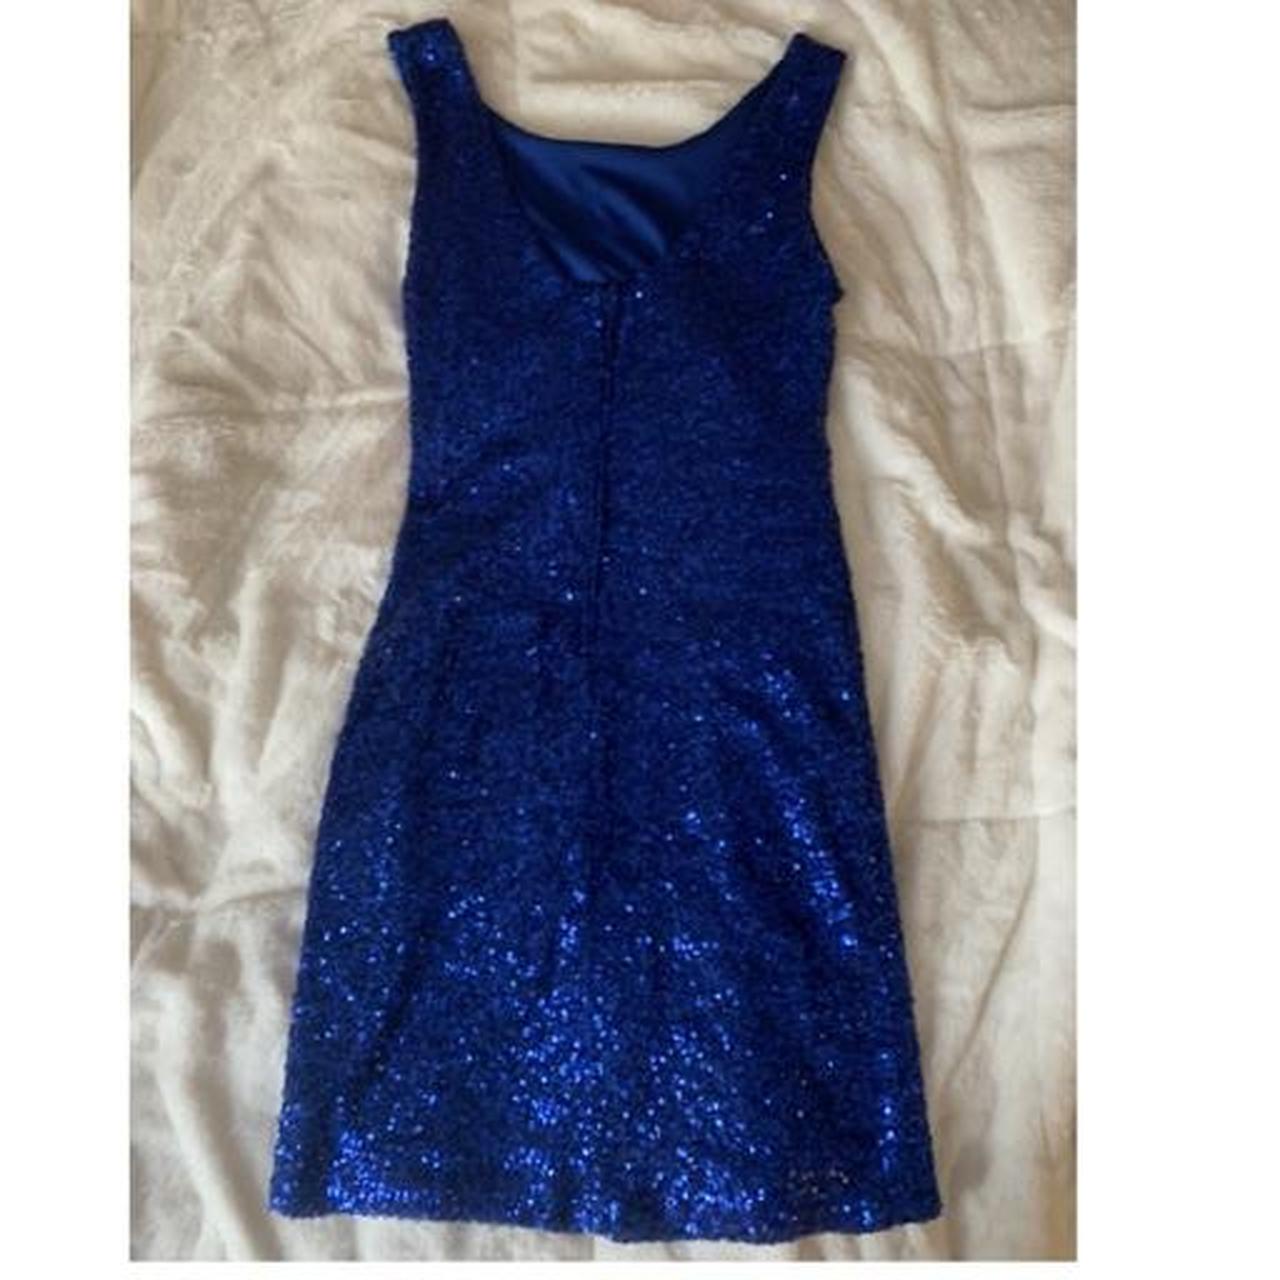 Product Image 2 - Blue sparkle dress form fitting.